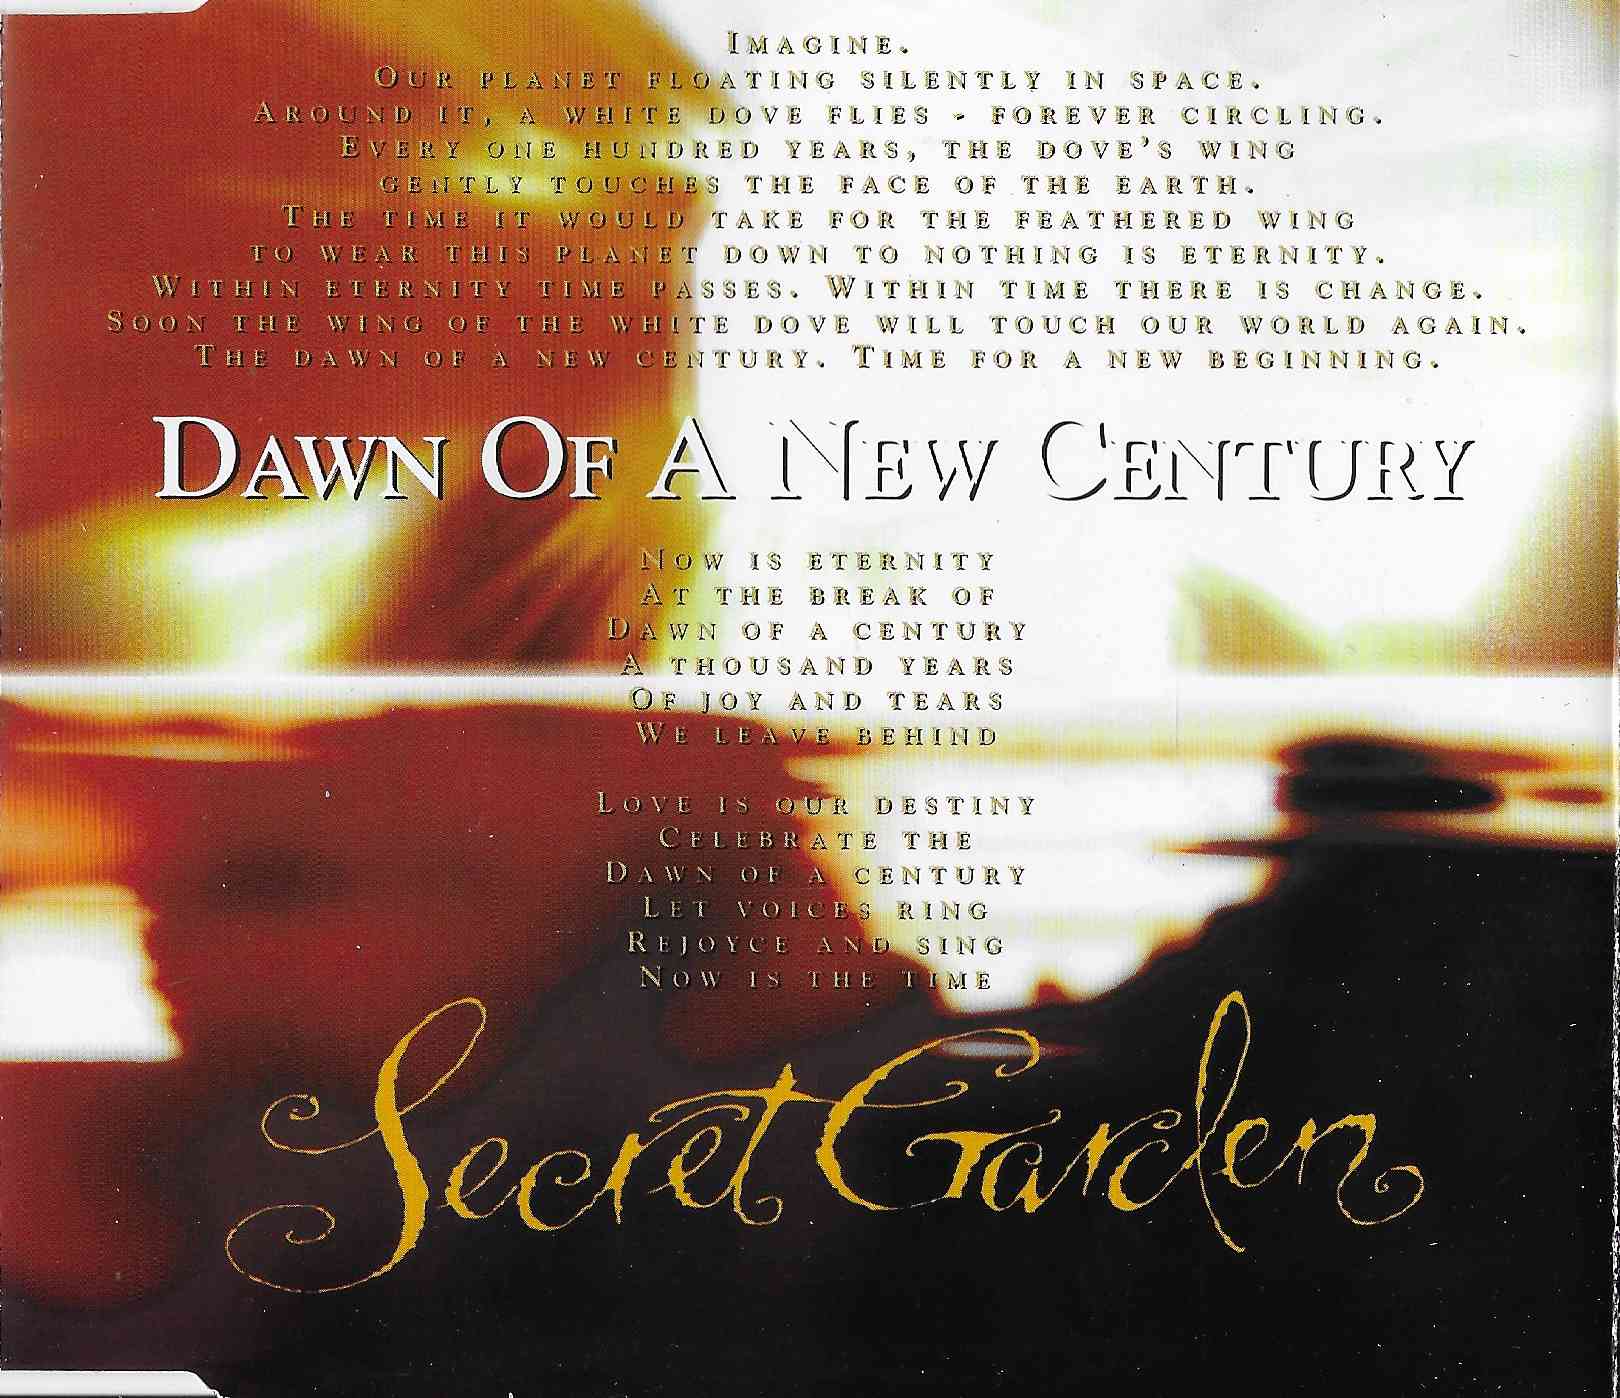 Picture of Dawn of a new century by artist Secret Garden 